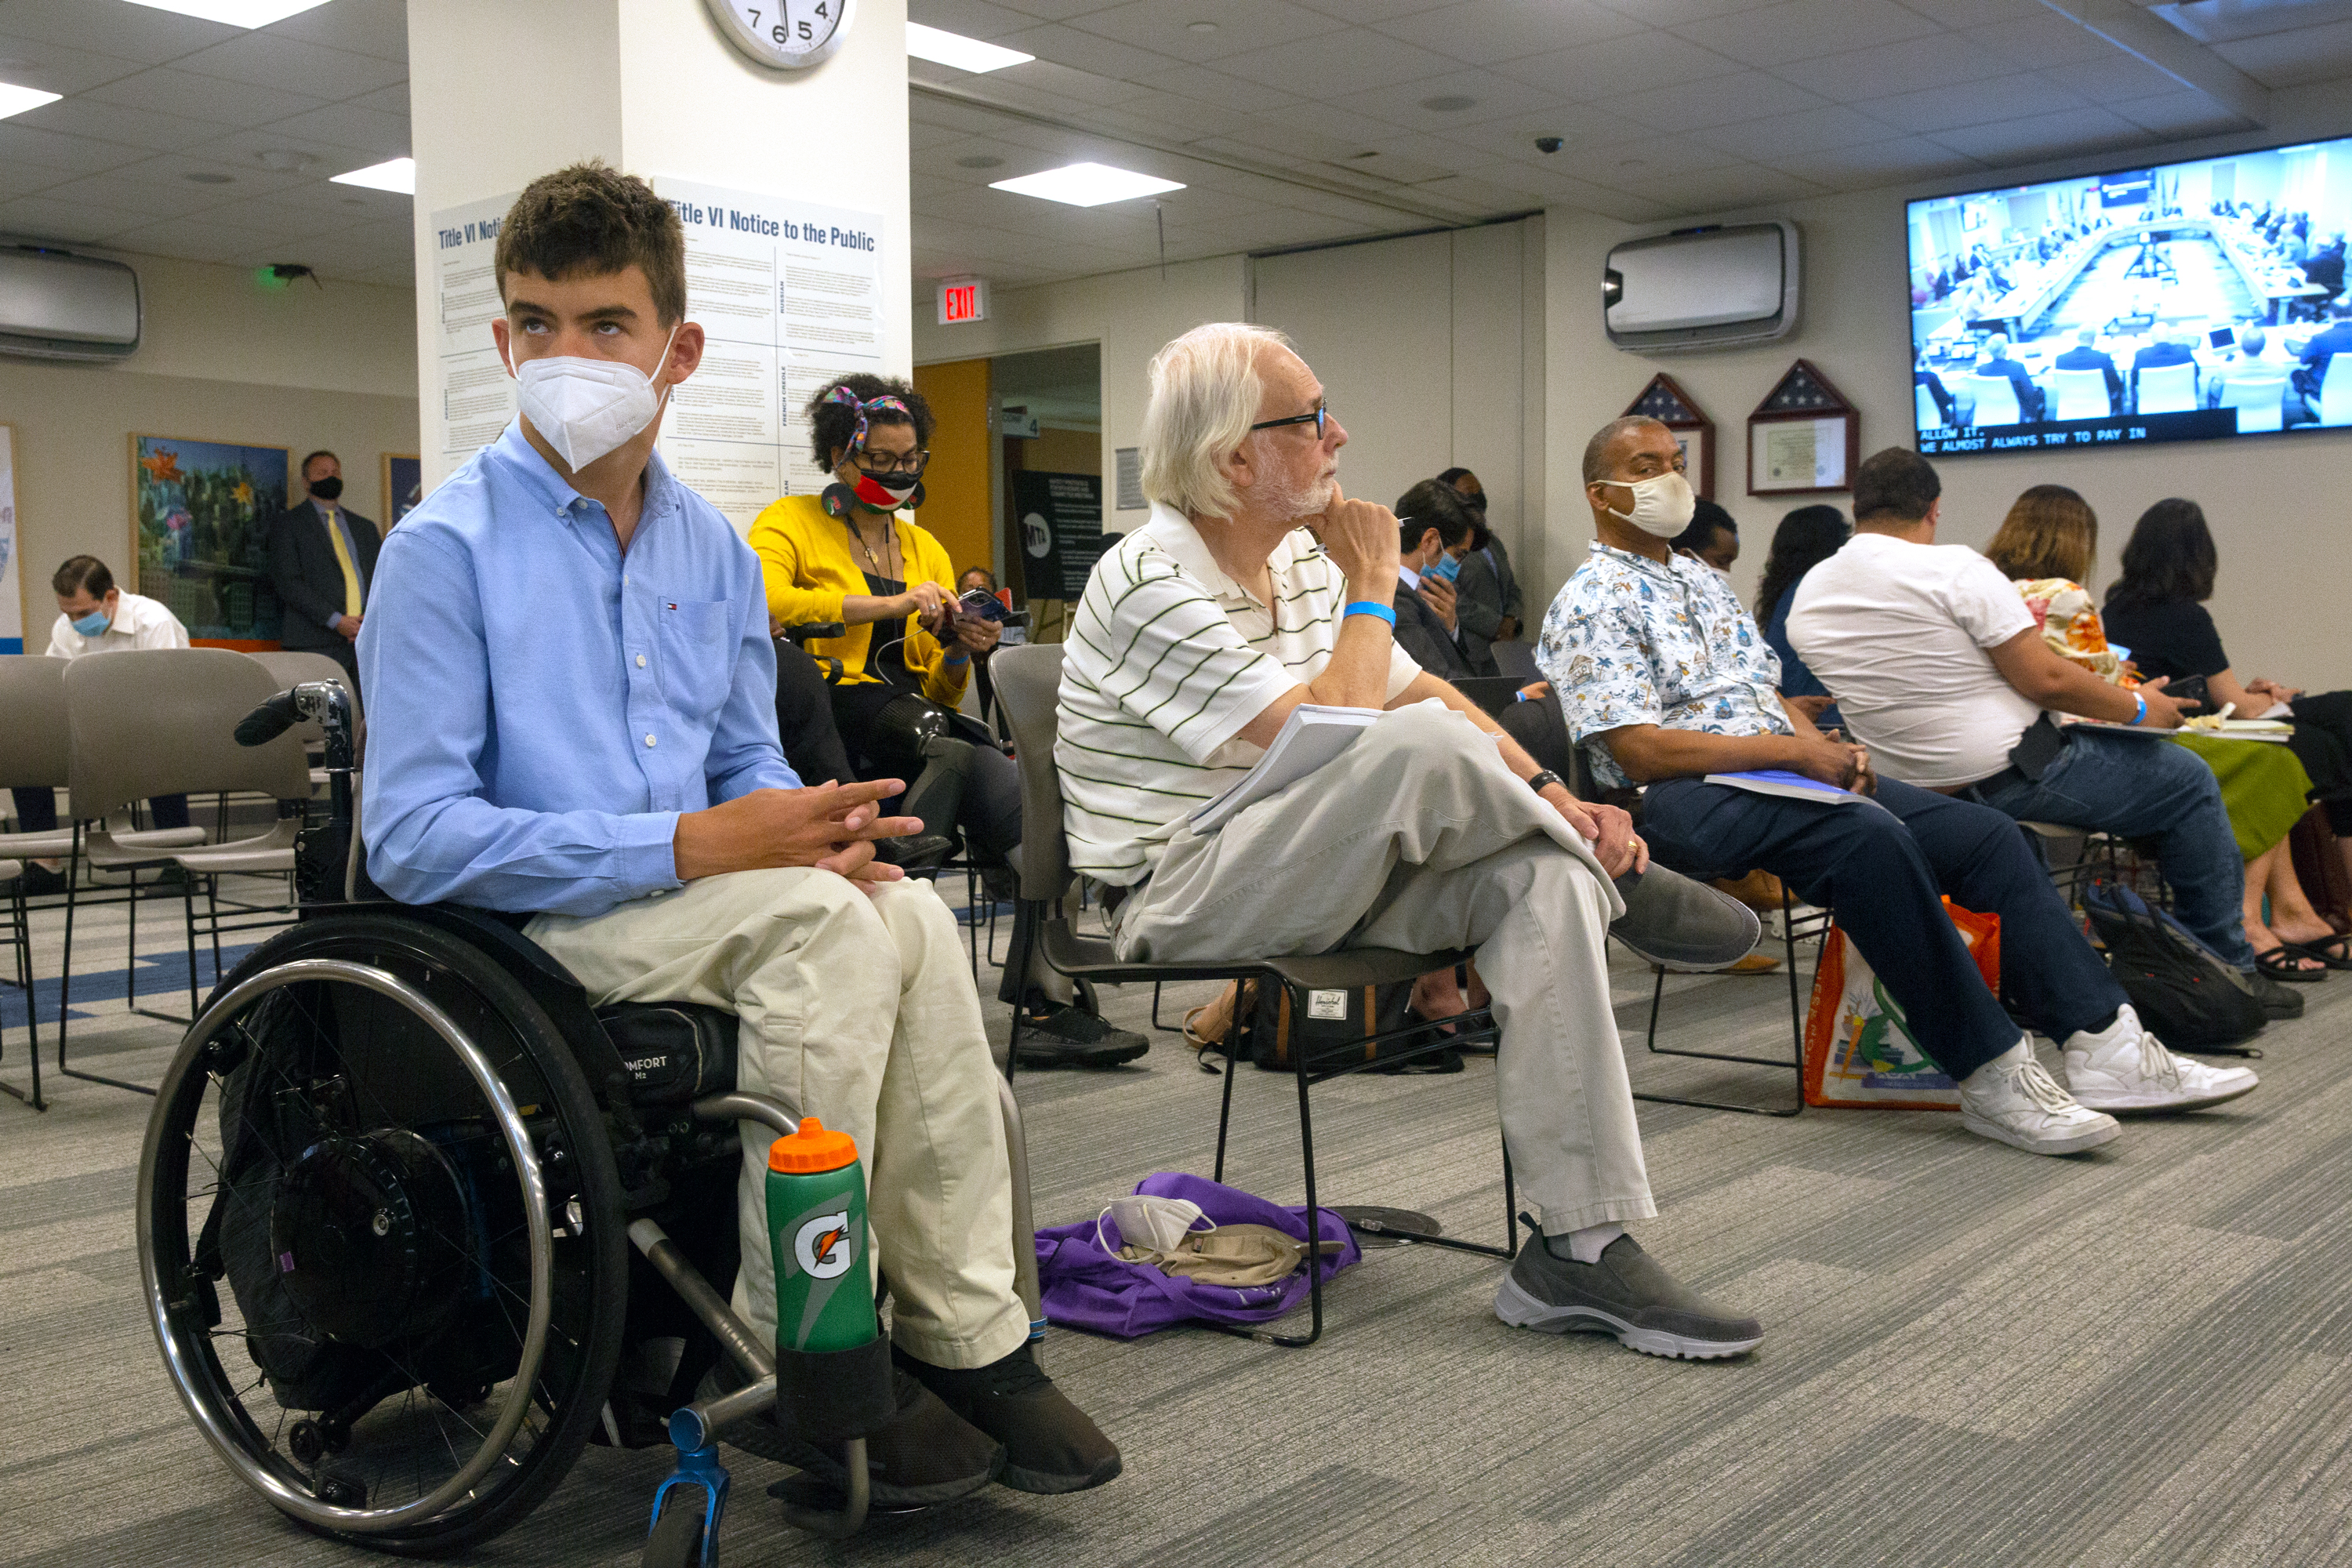 The first in-person full MTA board meeting of the pandemic, held in Lower Manhattan on July 21, 2021.